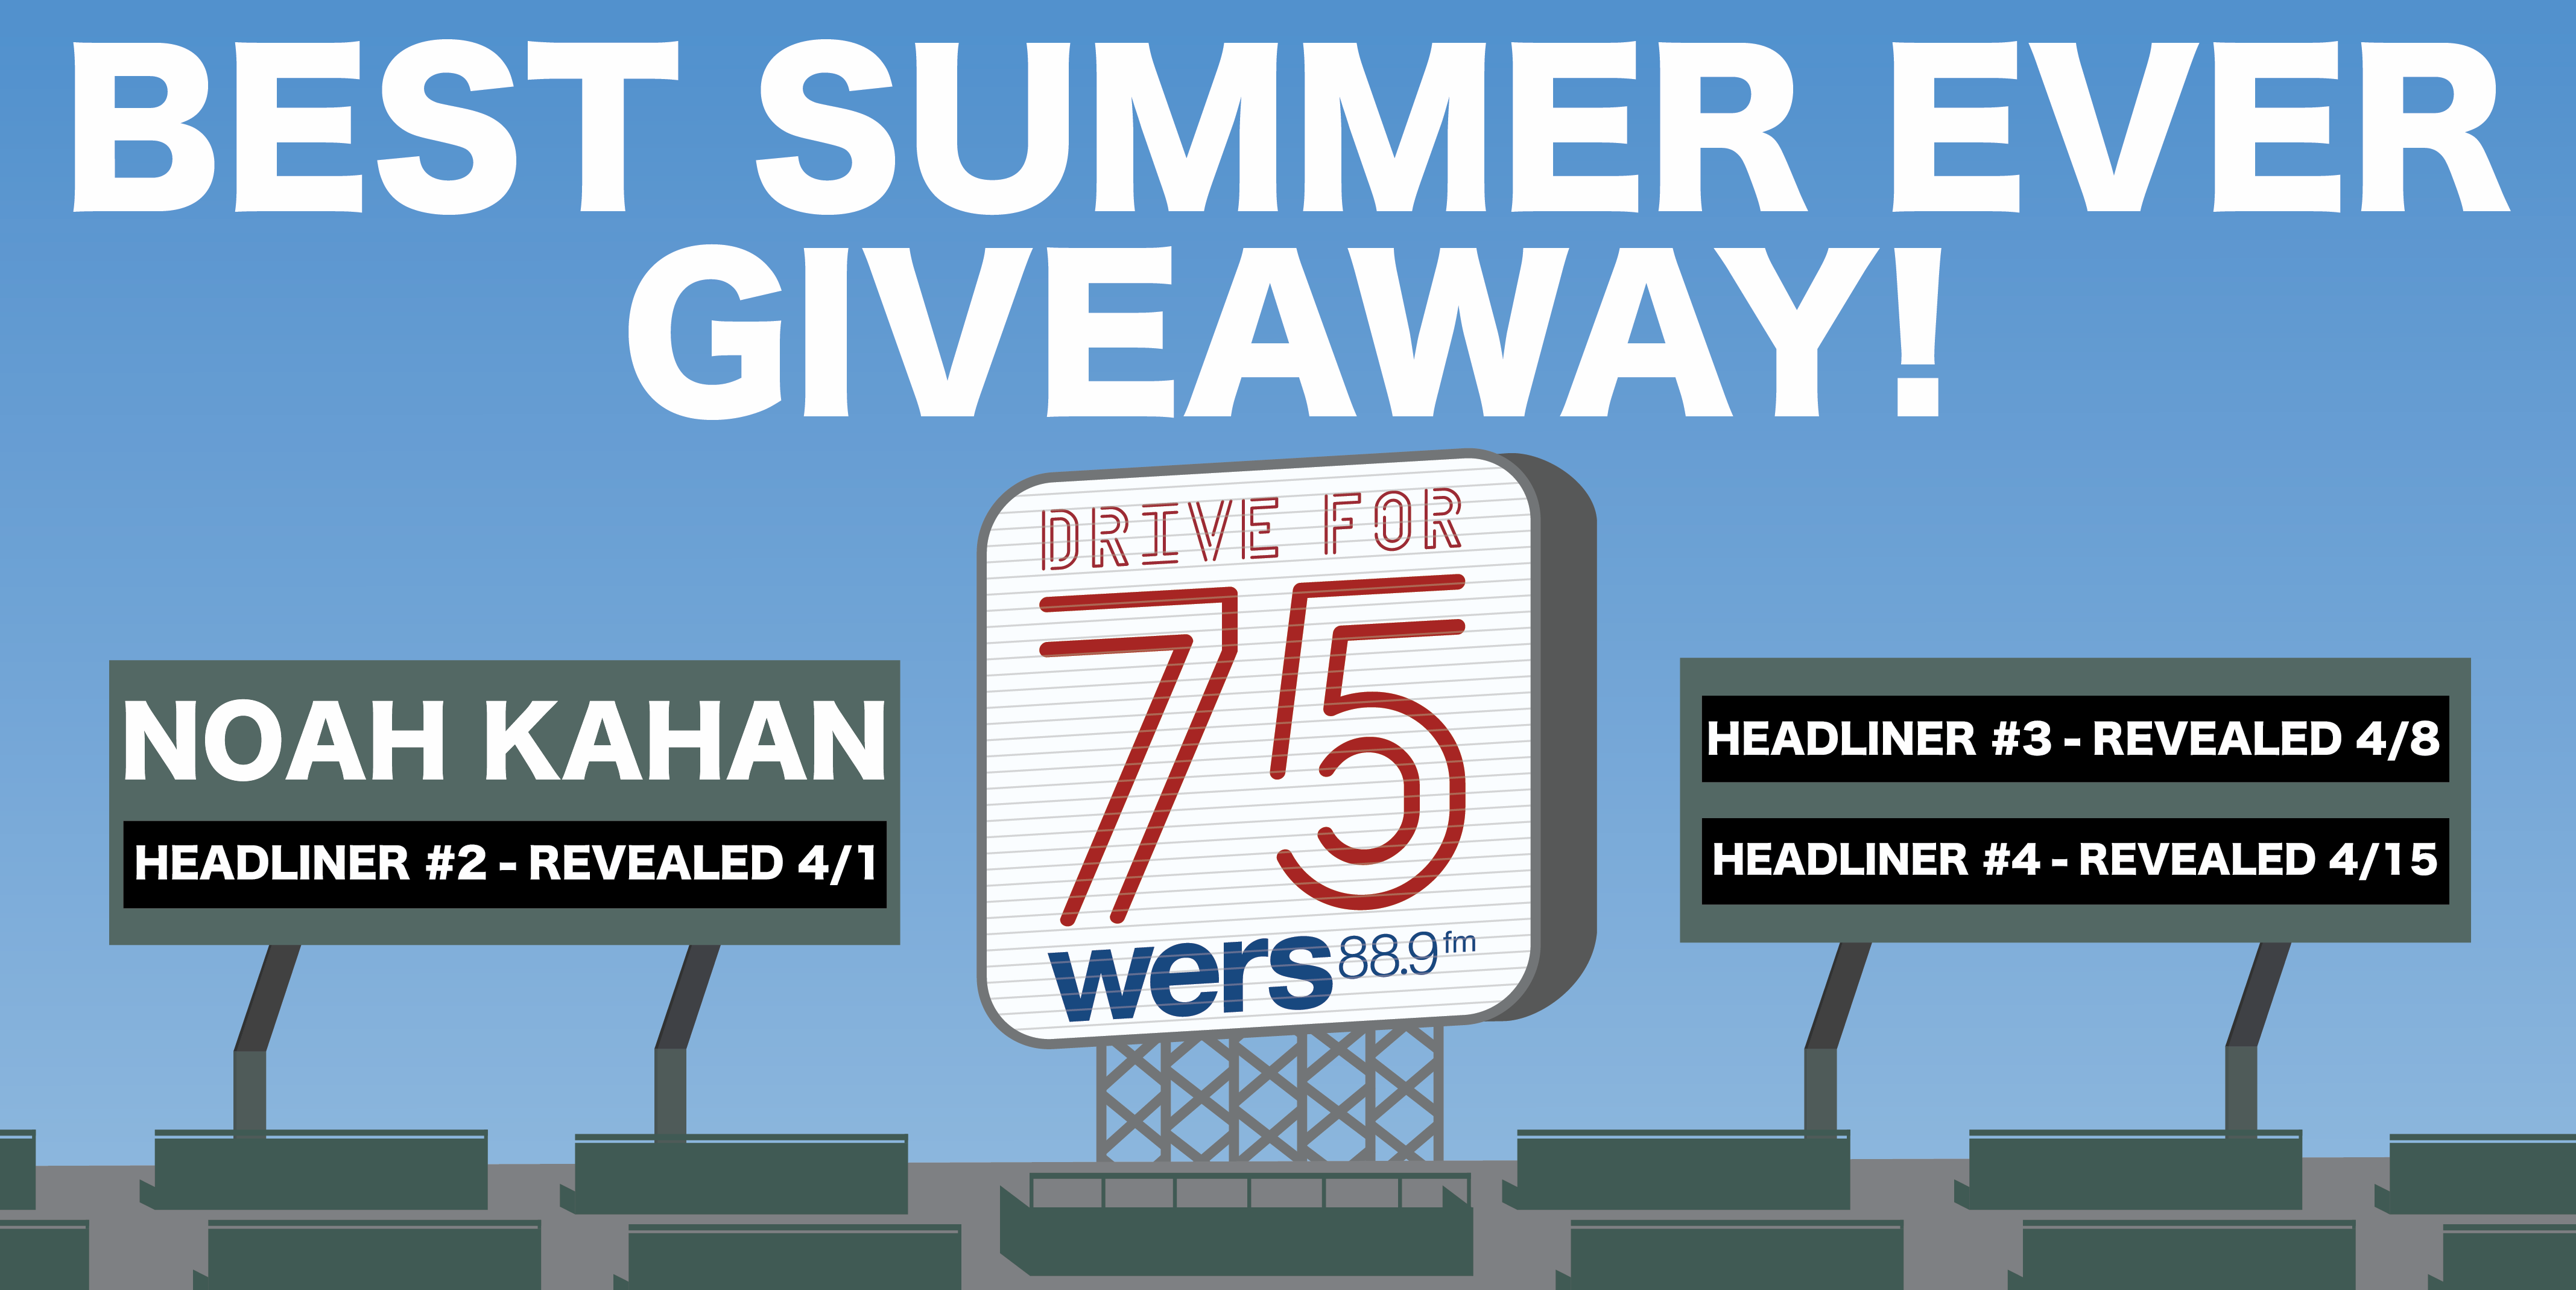 Graphics of Fenway stadium with a "Dive for 75 WERS 88.9" billboard and white text overhead that says "Best Summer Ever Giveaway!"